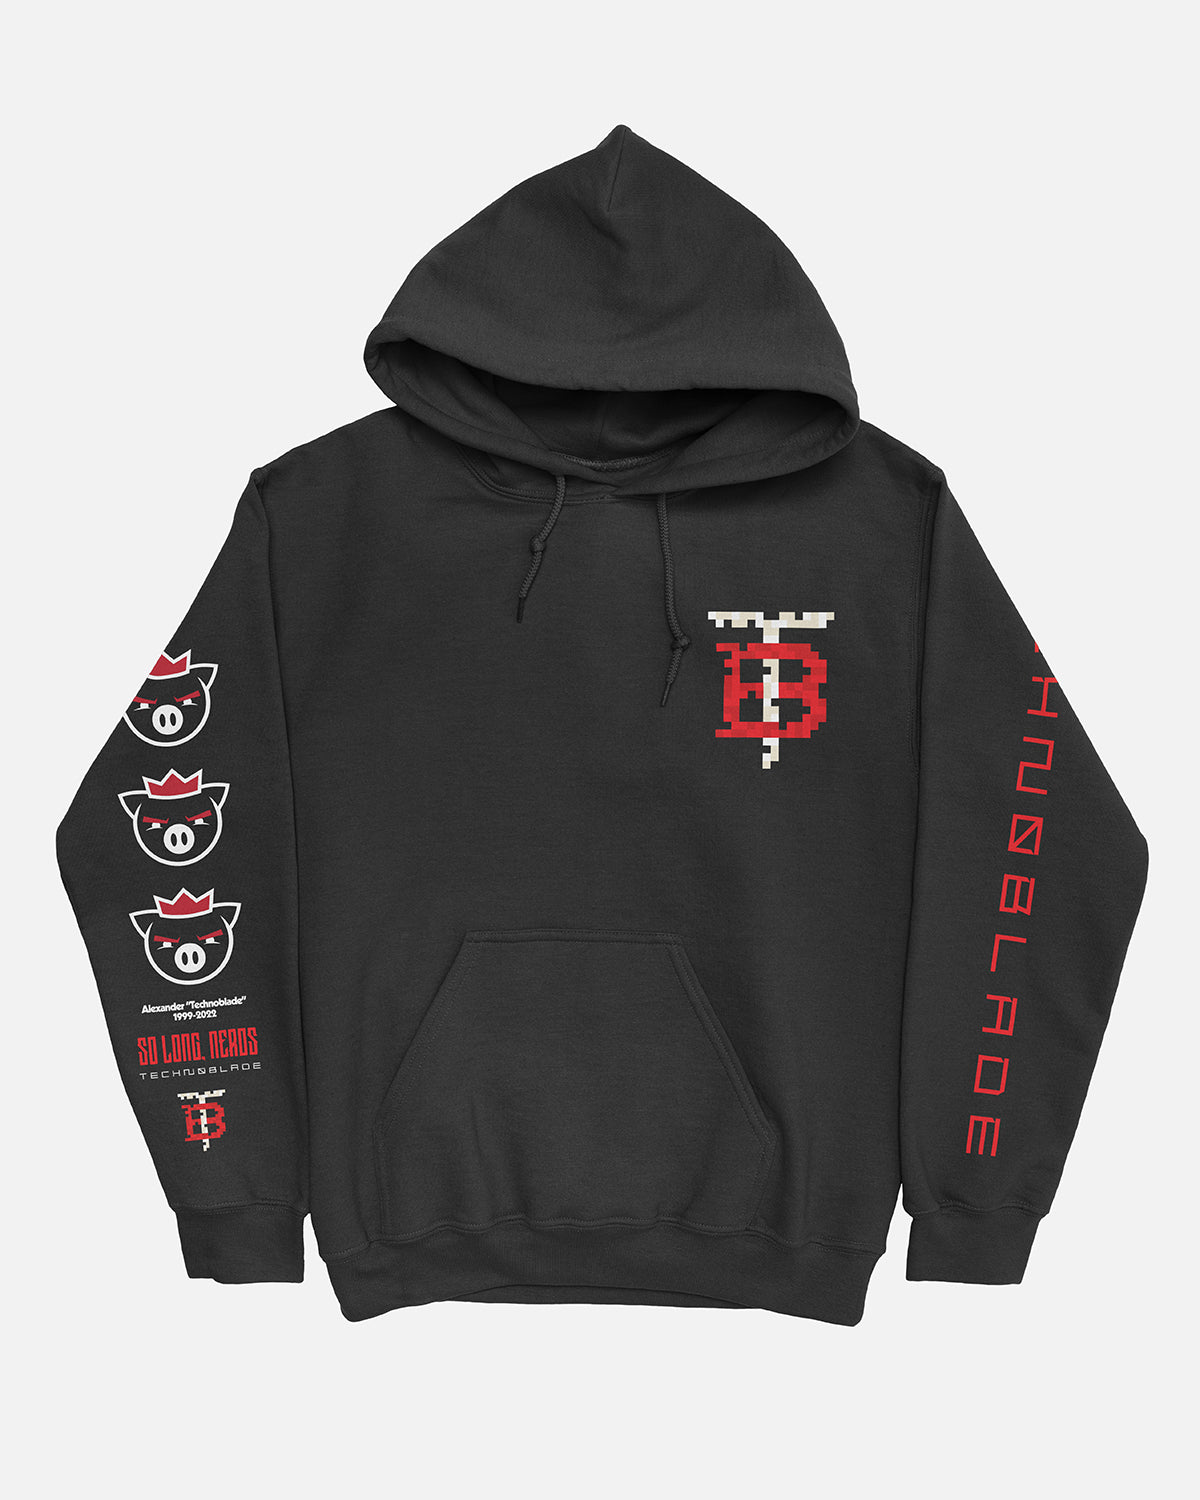 Technoblade 'Good Game' Hoodie (Black) - Technoblade Official